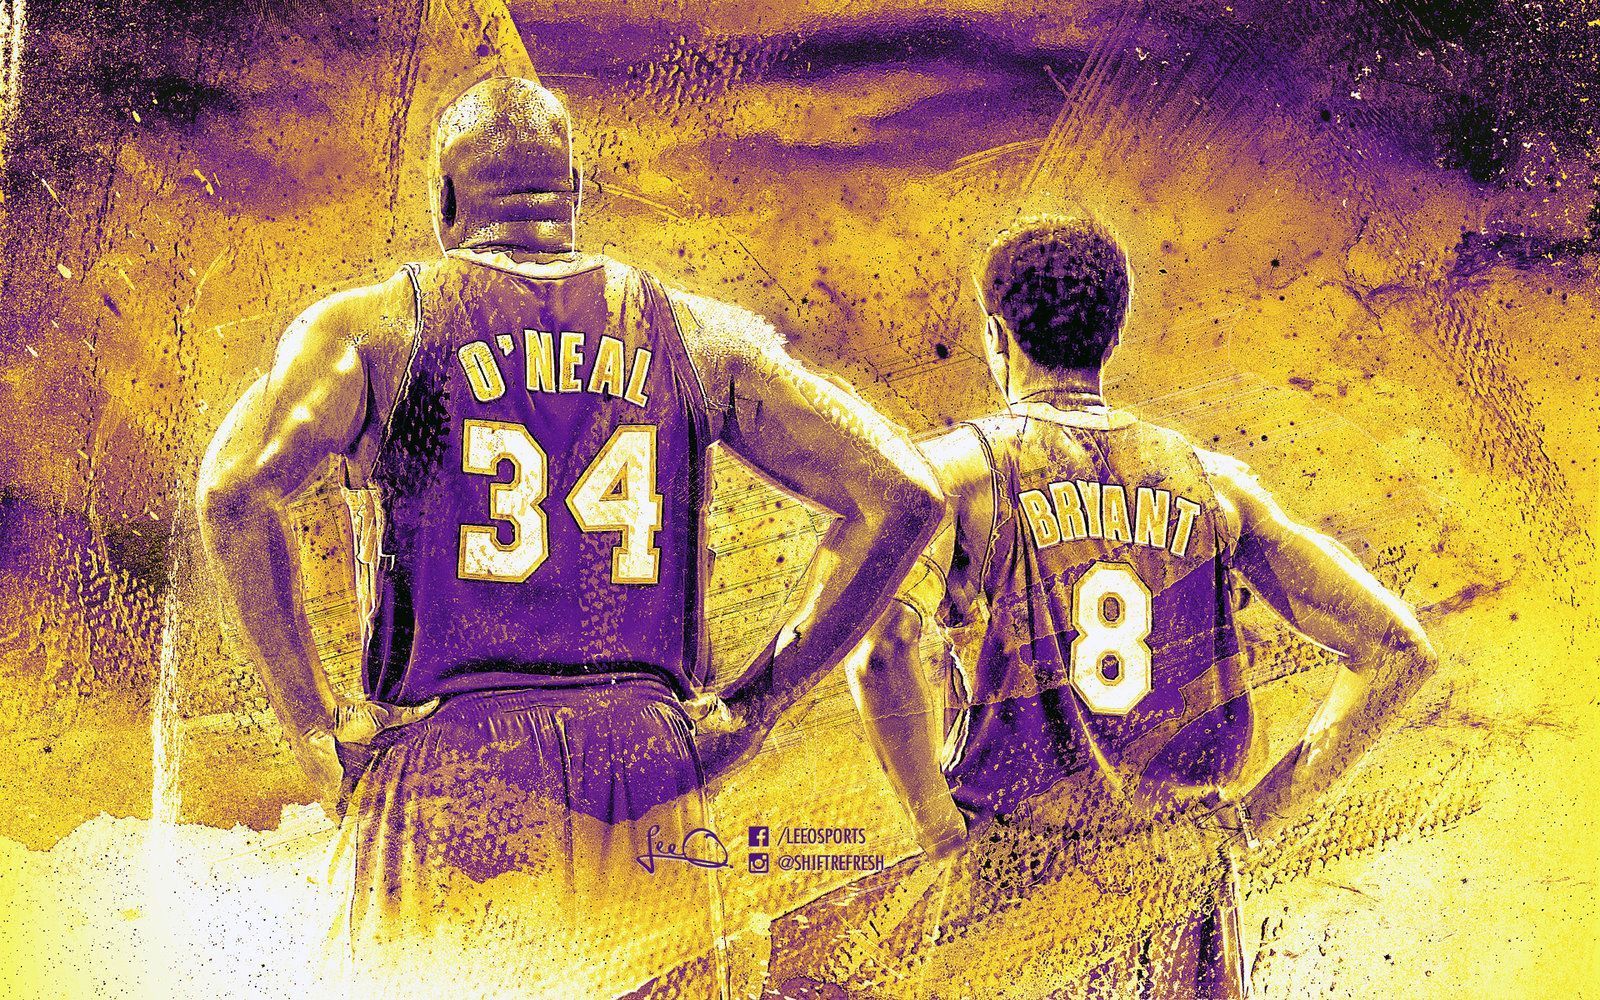 Lakers Phone Wallpapers  Top Free Lakers Phone Backgrounds   WallpaperAccess